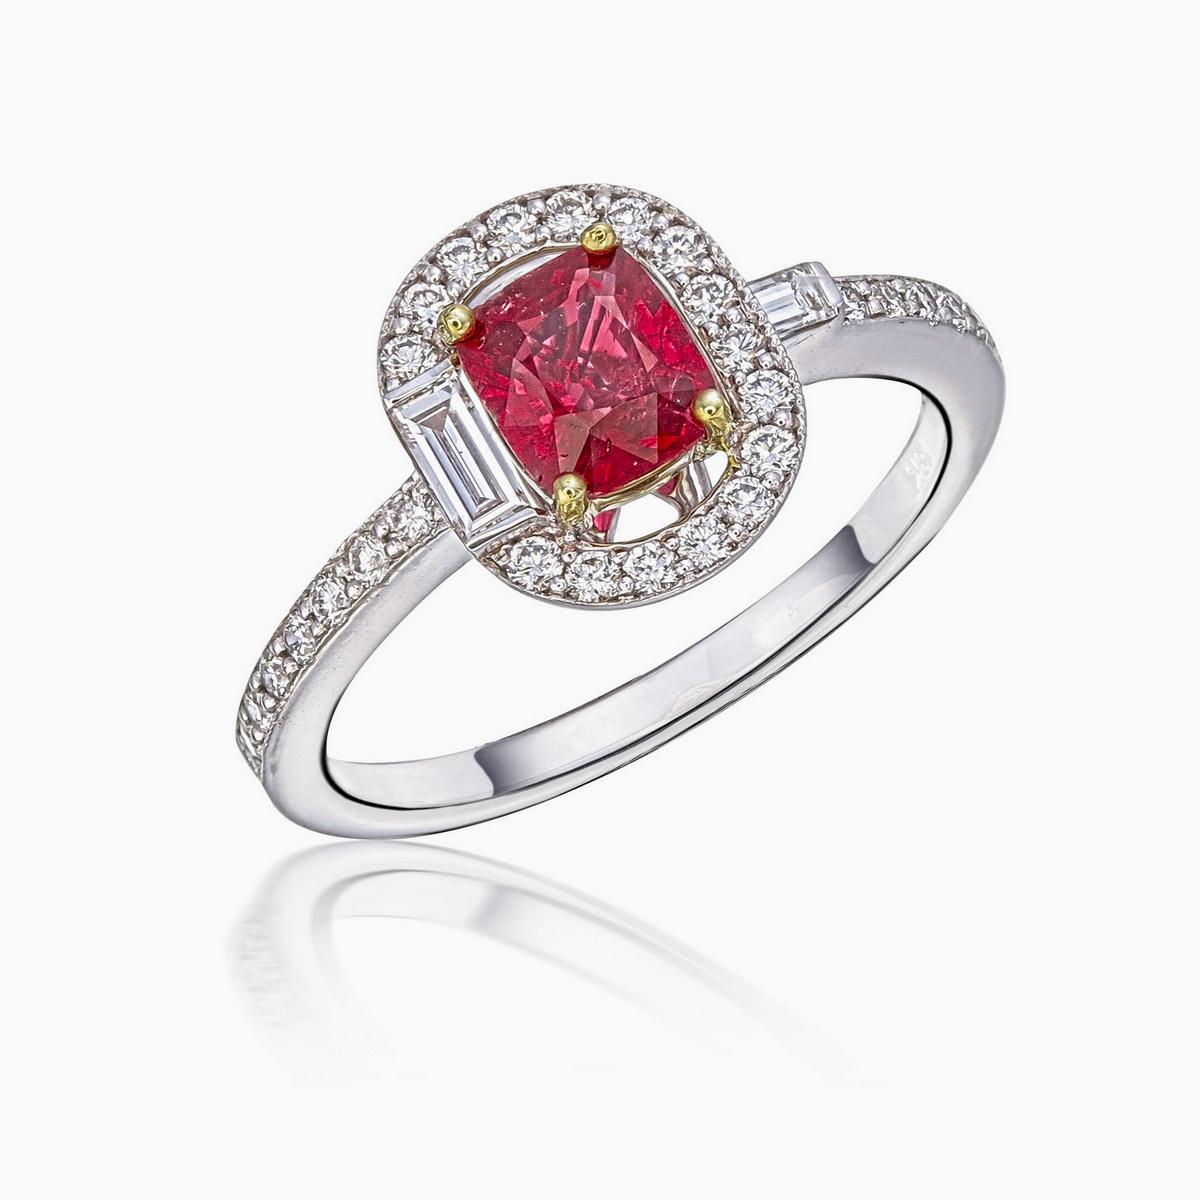 A ‘Pigeon Blood’ red hue ruby and diamond solitare ring made in 18 Karat gold. This ring was inspired by art-decor themes portrayed through the use and placement of baguette-cut diamonds. A good choice for everyday wear or for special occasions. 

 